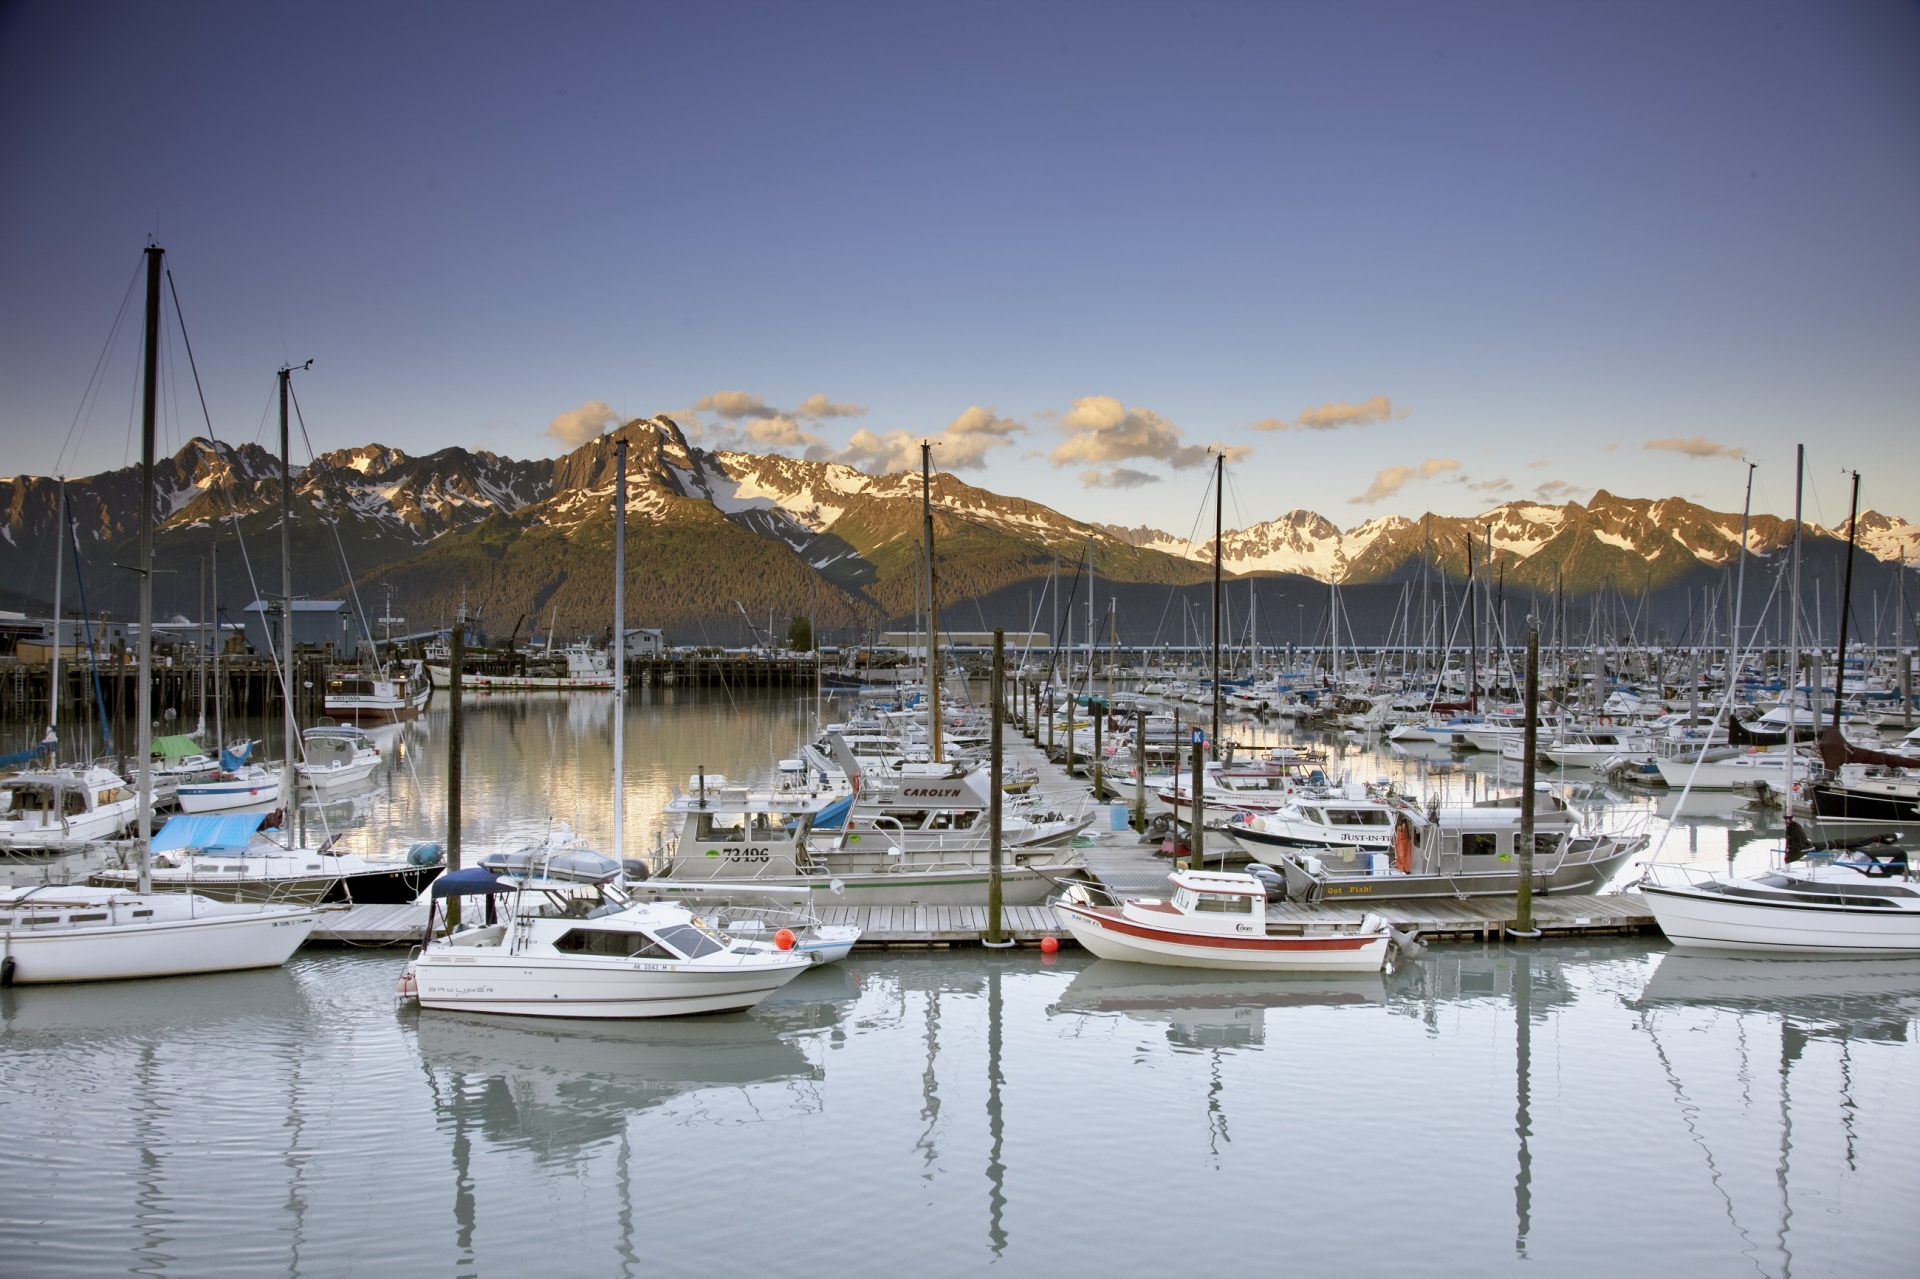 Boats in port at the dawn of a new day in Alaska